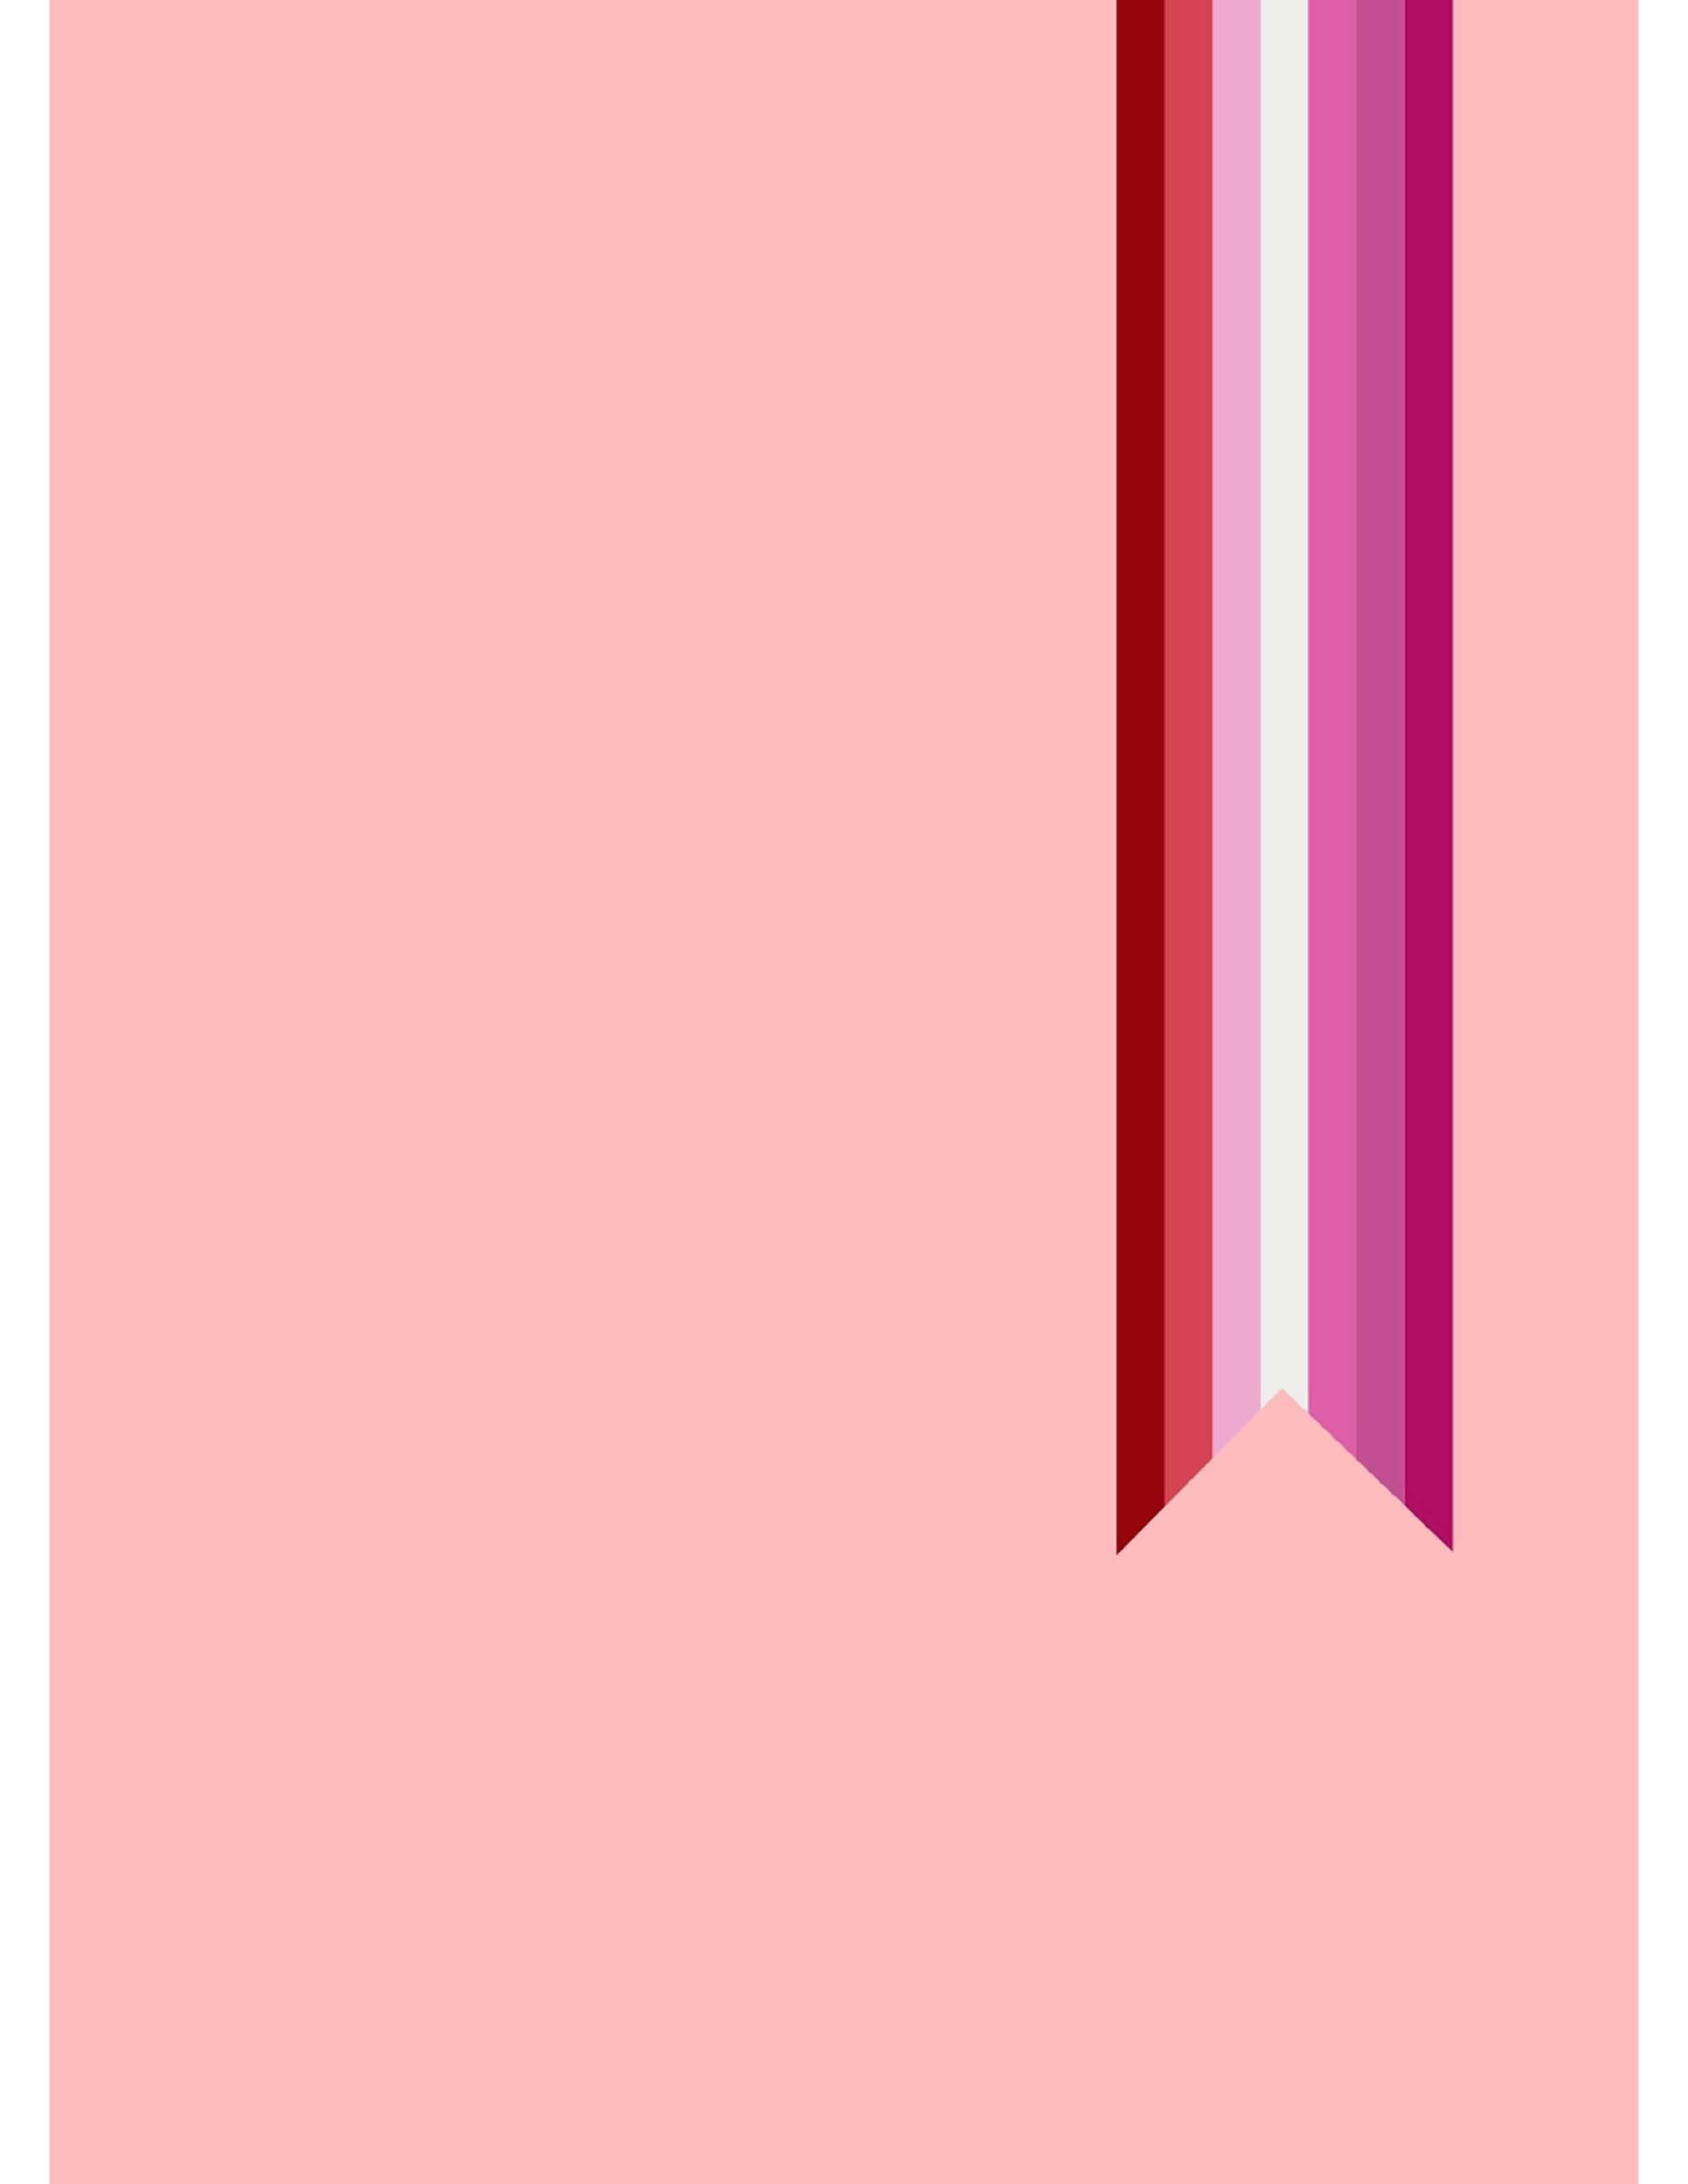 An image of a pink background with a pink and red stripe on the right hand side. - Lesbian